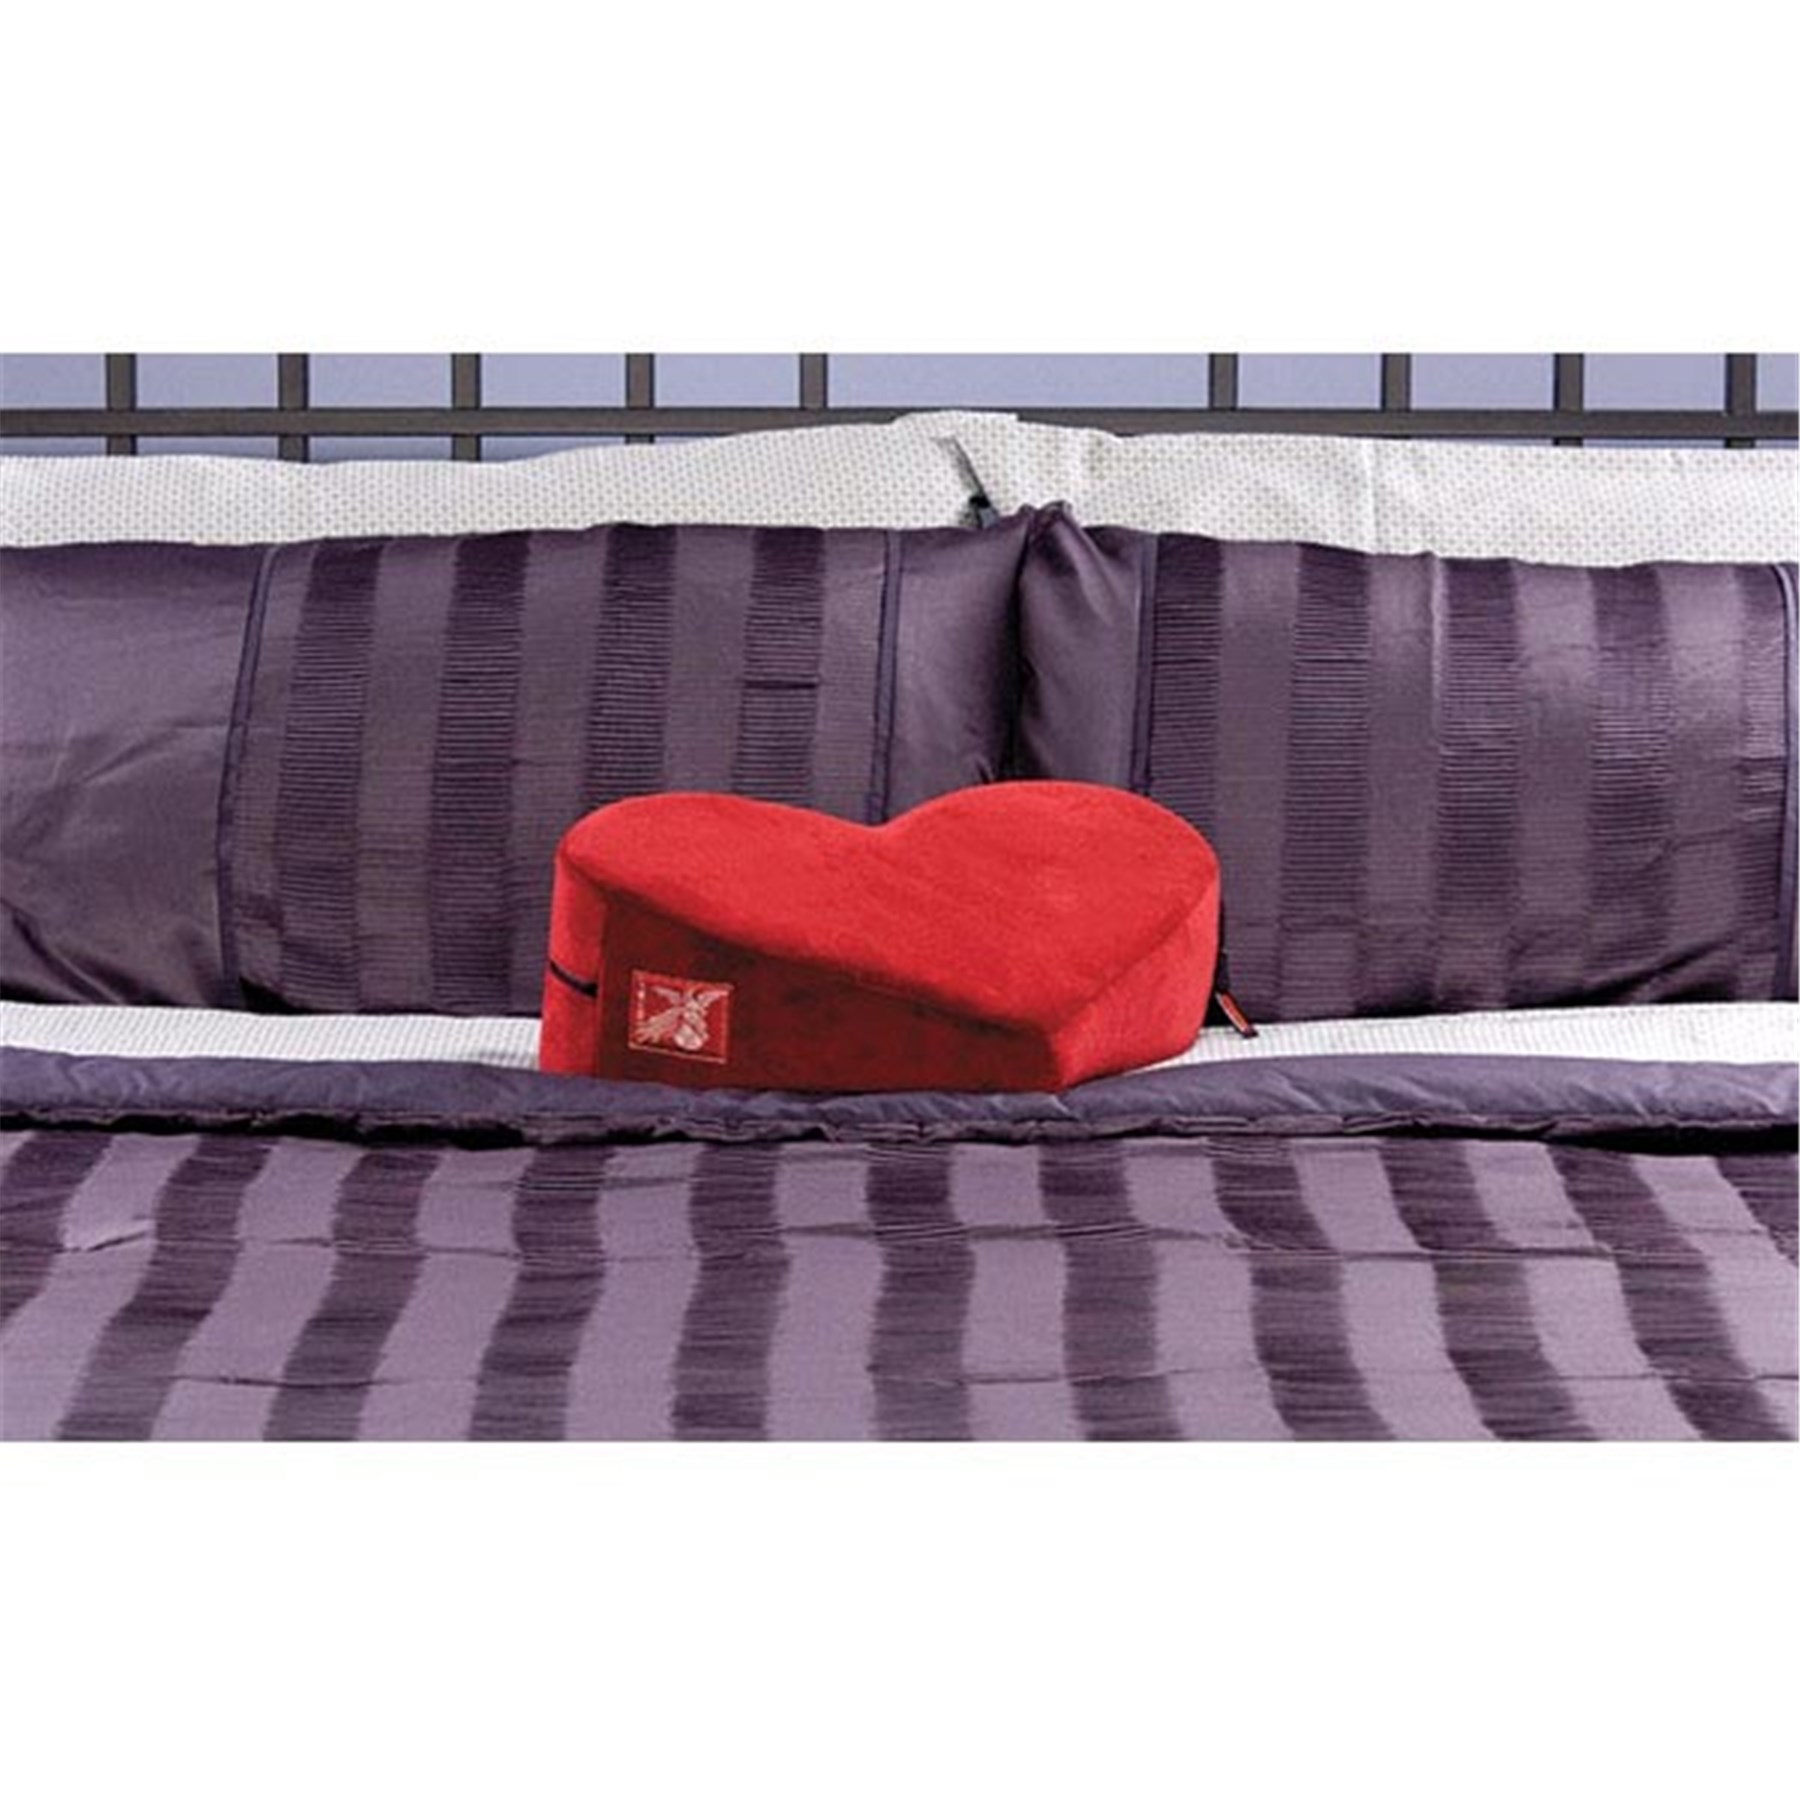 Liberator Heart Wedge - Product on Bed